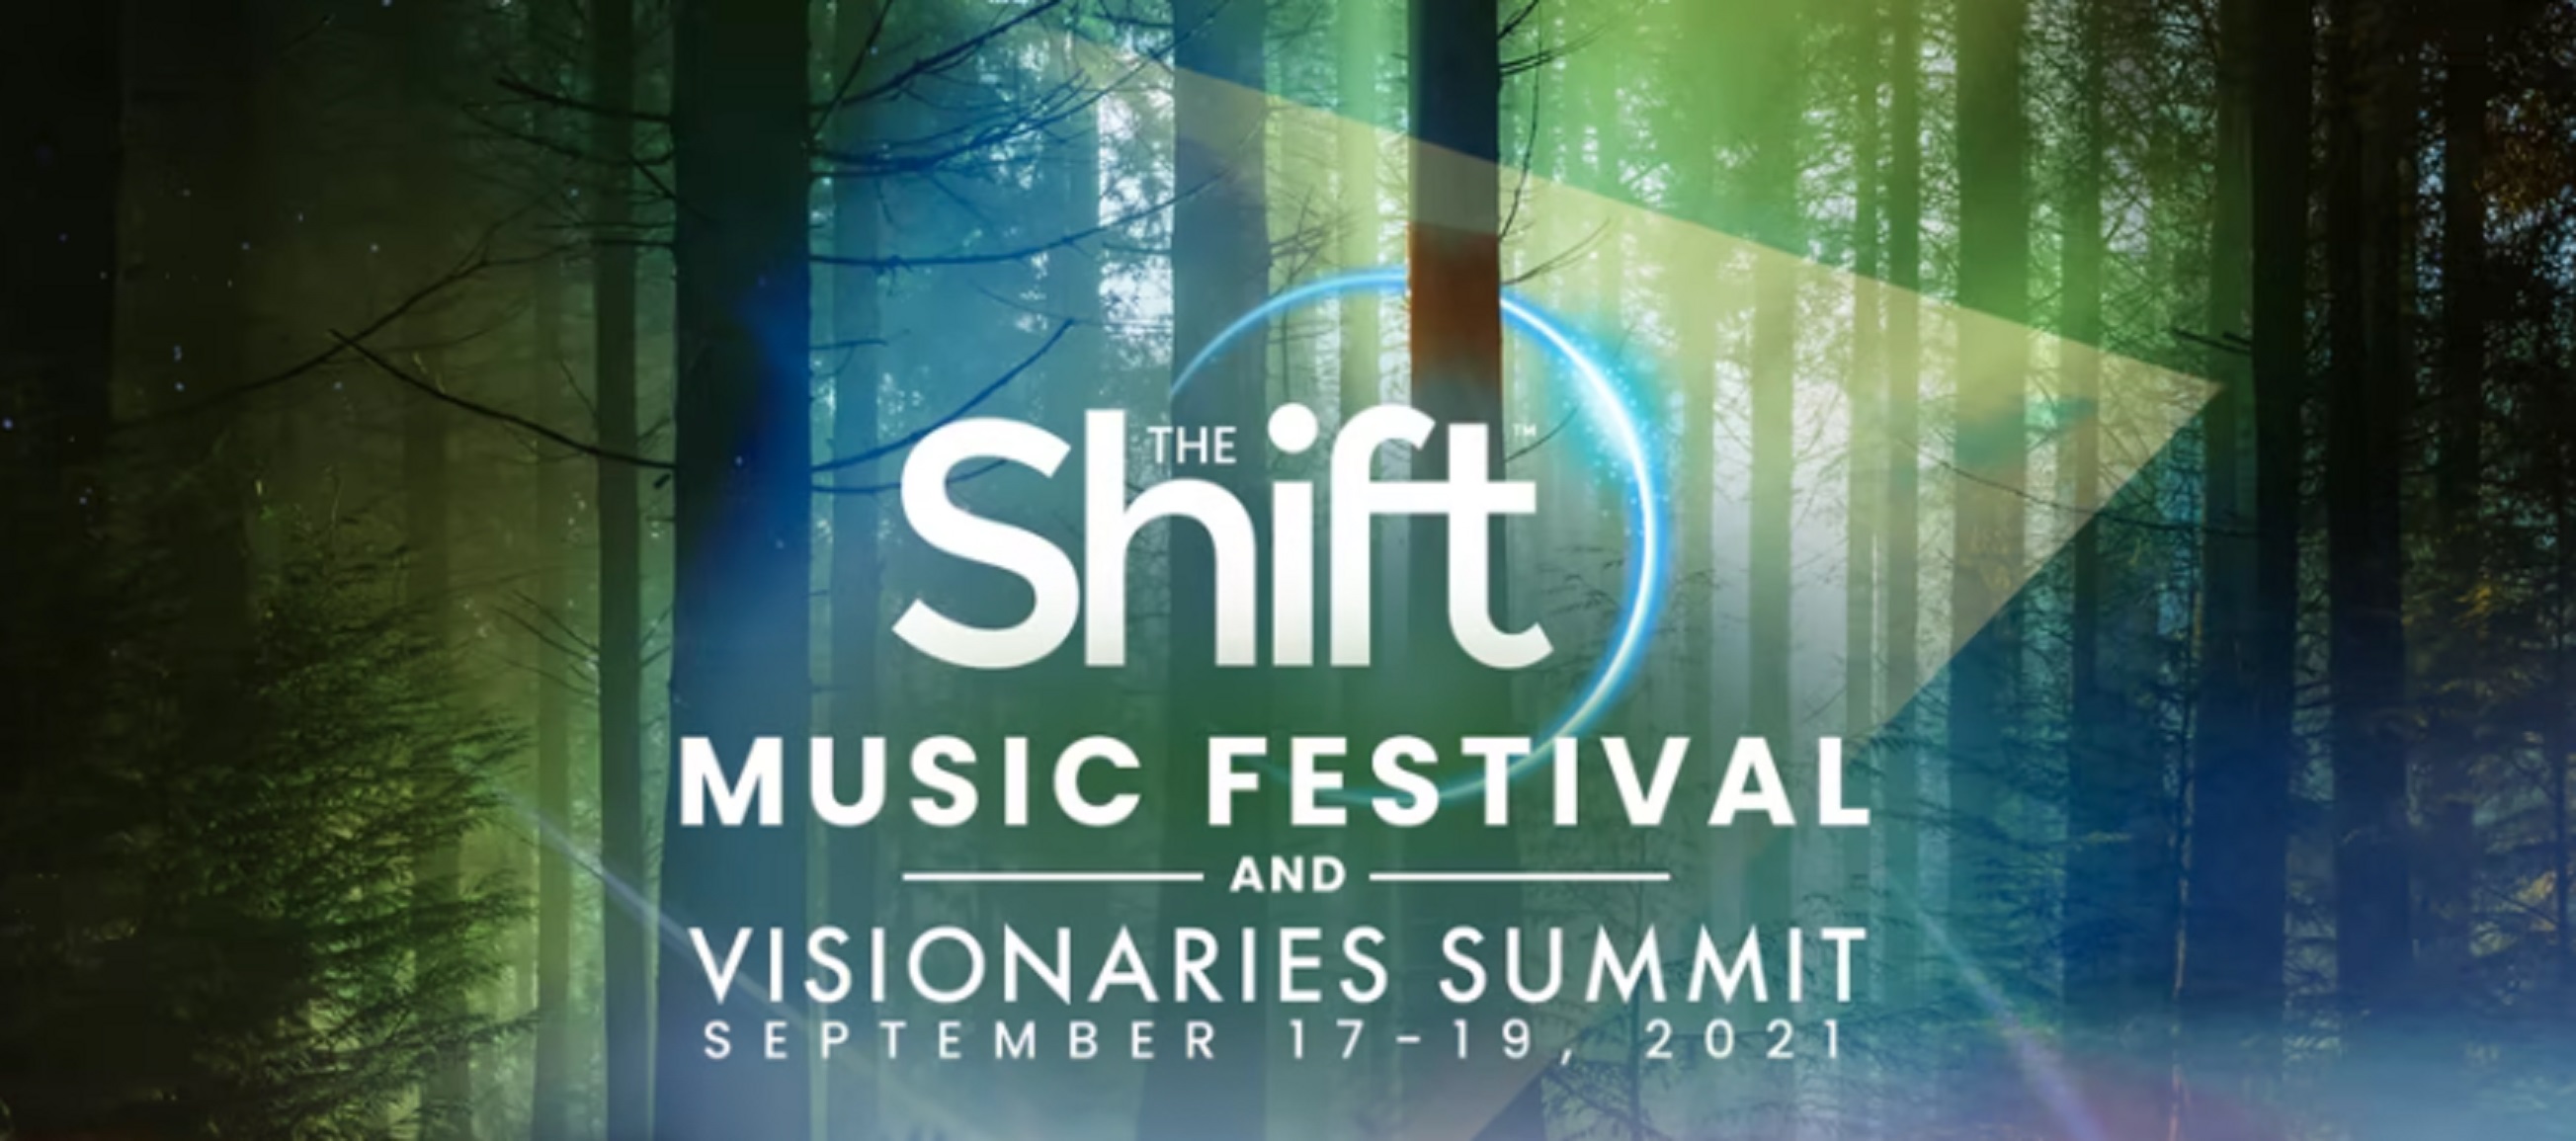 The Shift Music Festival and Visionaries Summit 9/17-9/19